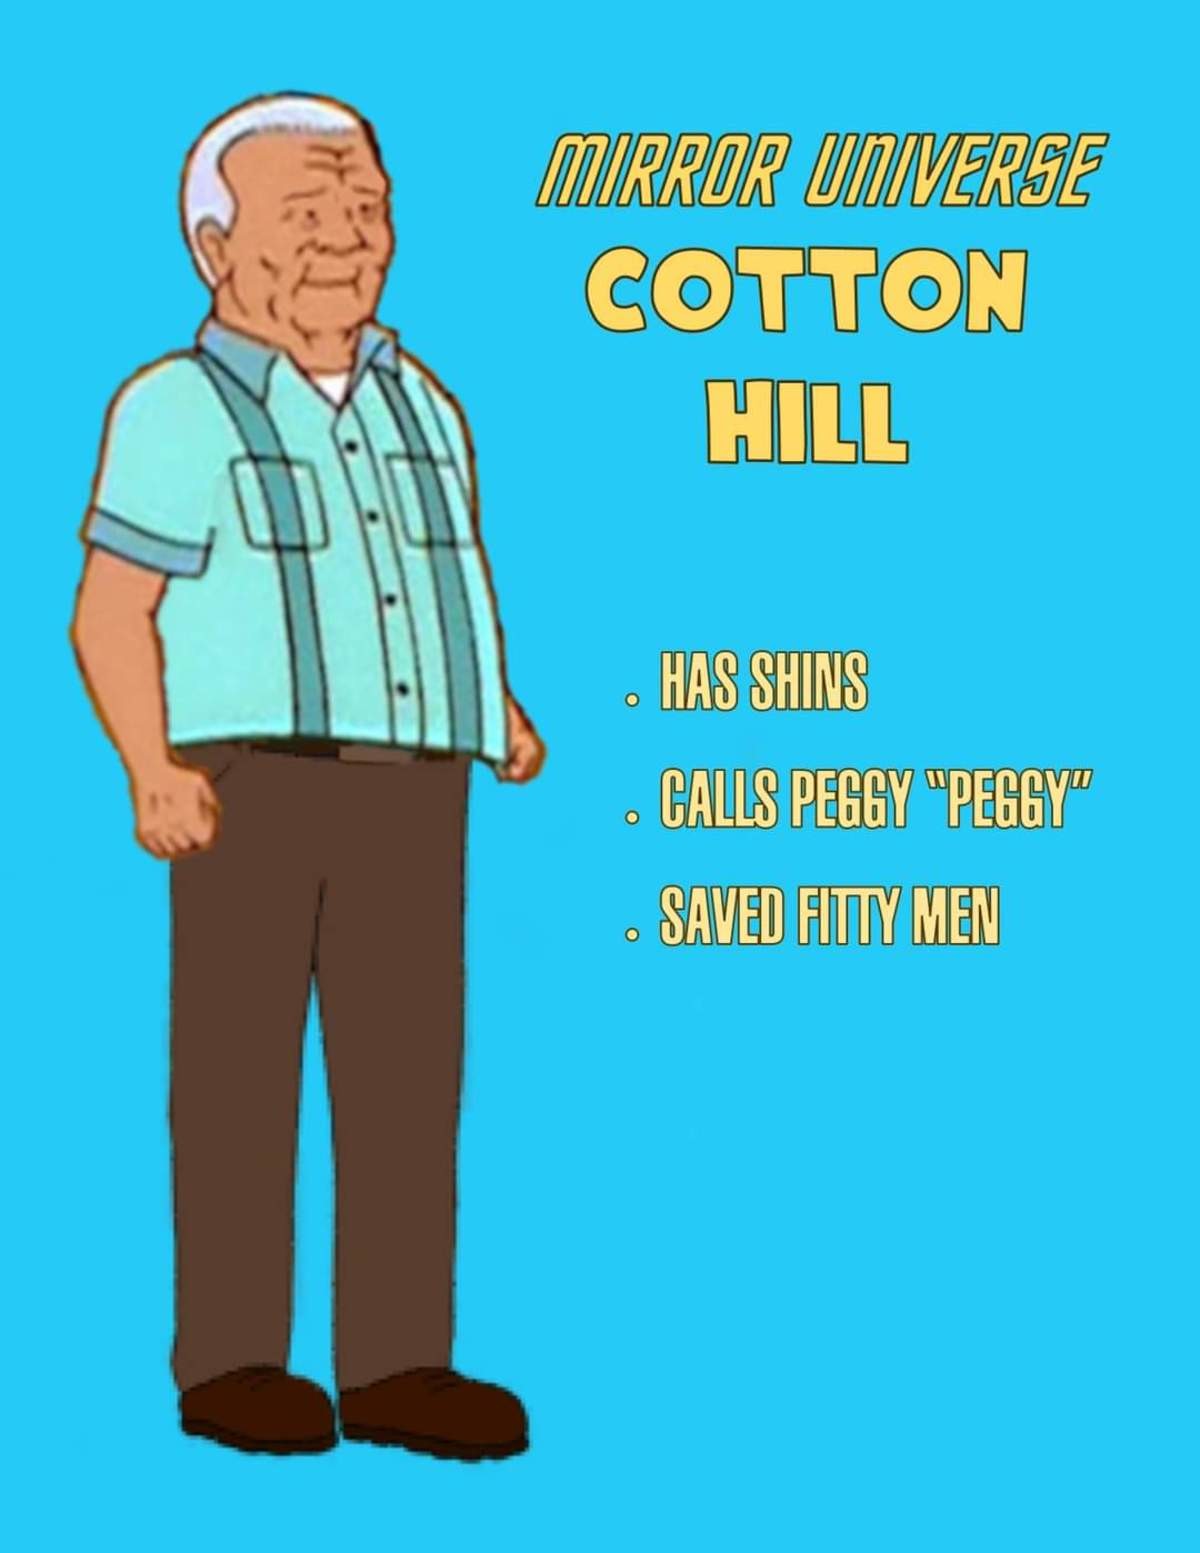 obsequious Rat. .. Mirror universe cotton hill lost both his arms in the war. He did save 50 men and they routinely drop by to buy him whiskey and give him army-buddy talking. He'